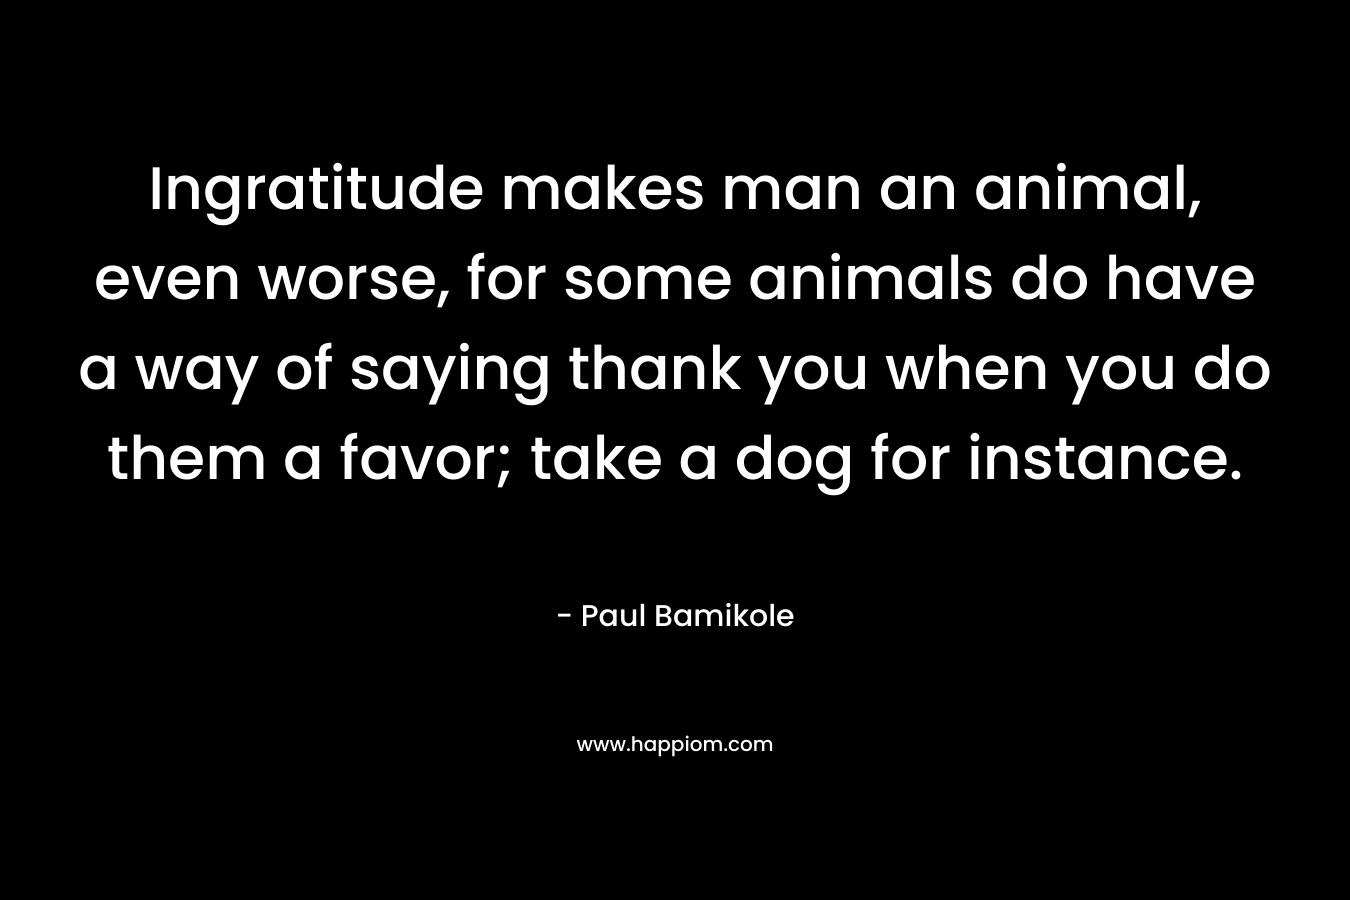 Ingratitude makes man an animal, even worse, for some animals do have a way of saying thank you when you do them a favor; take a dog for instance.